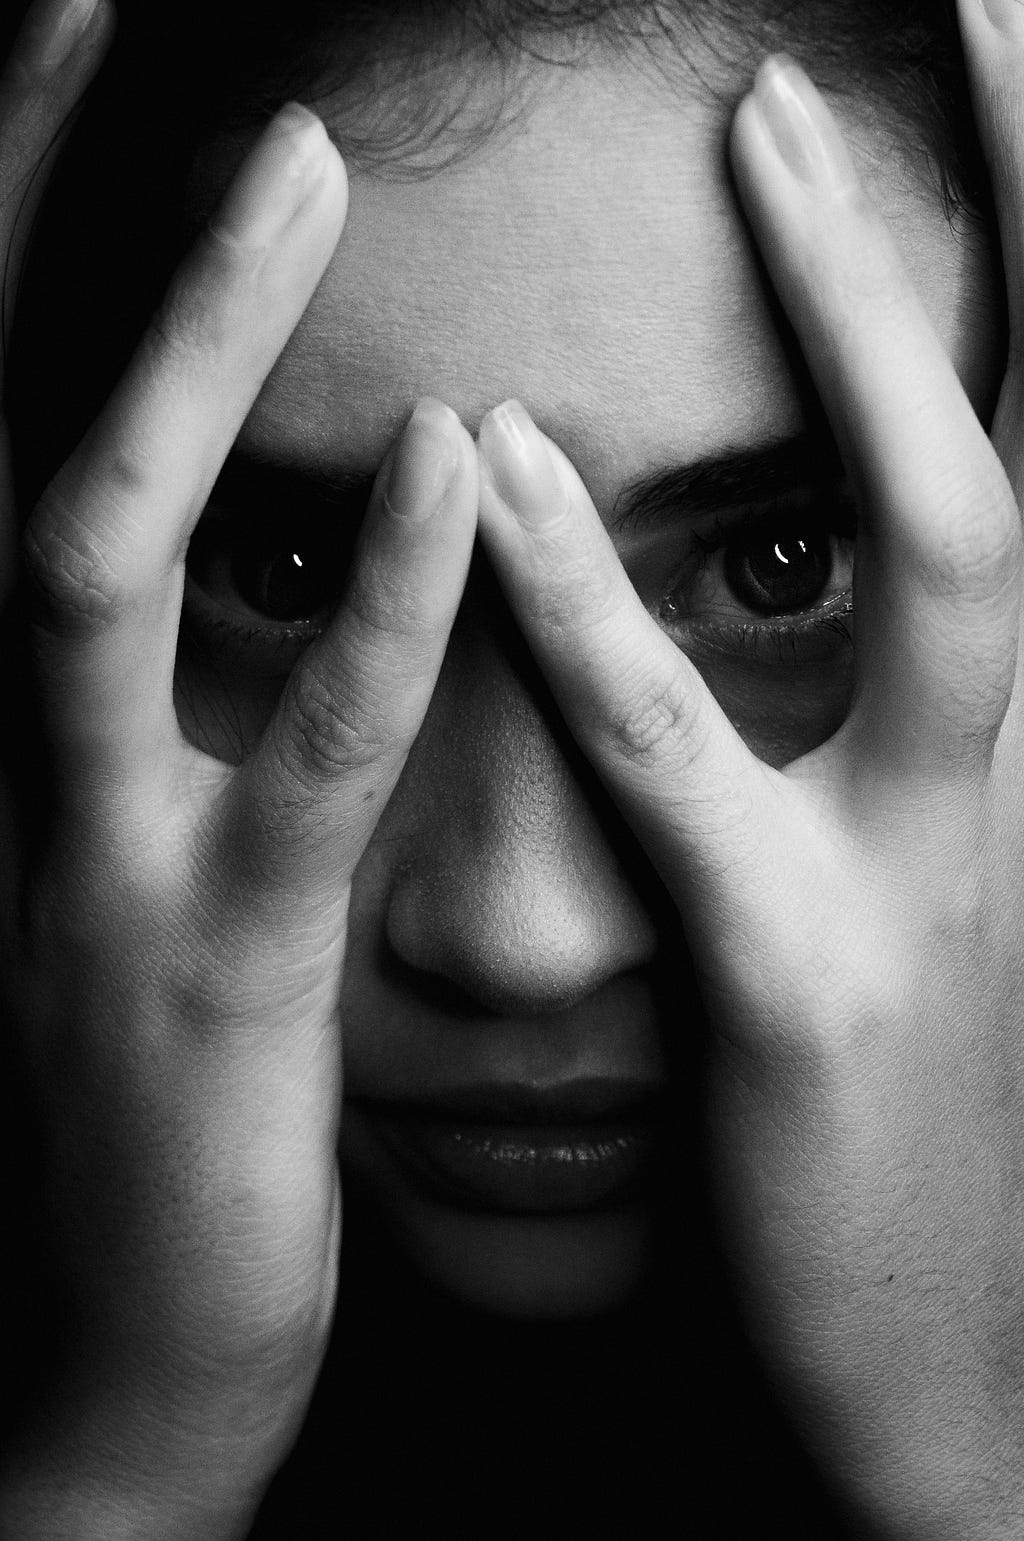 A young light skinned girl stares at the camera while covering her face with her hands, though her eyes are visible between the gaps in her fingers.